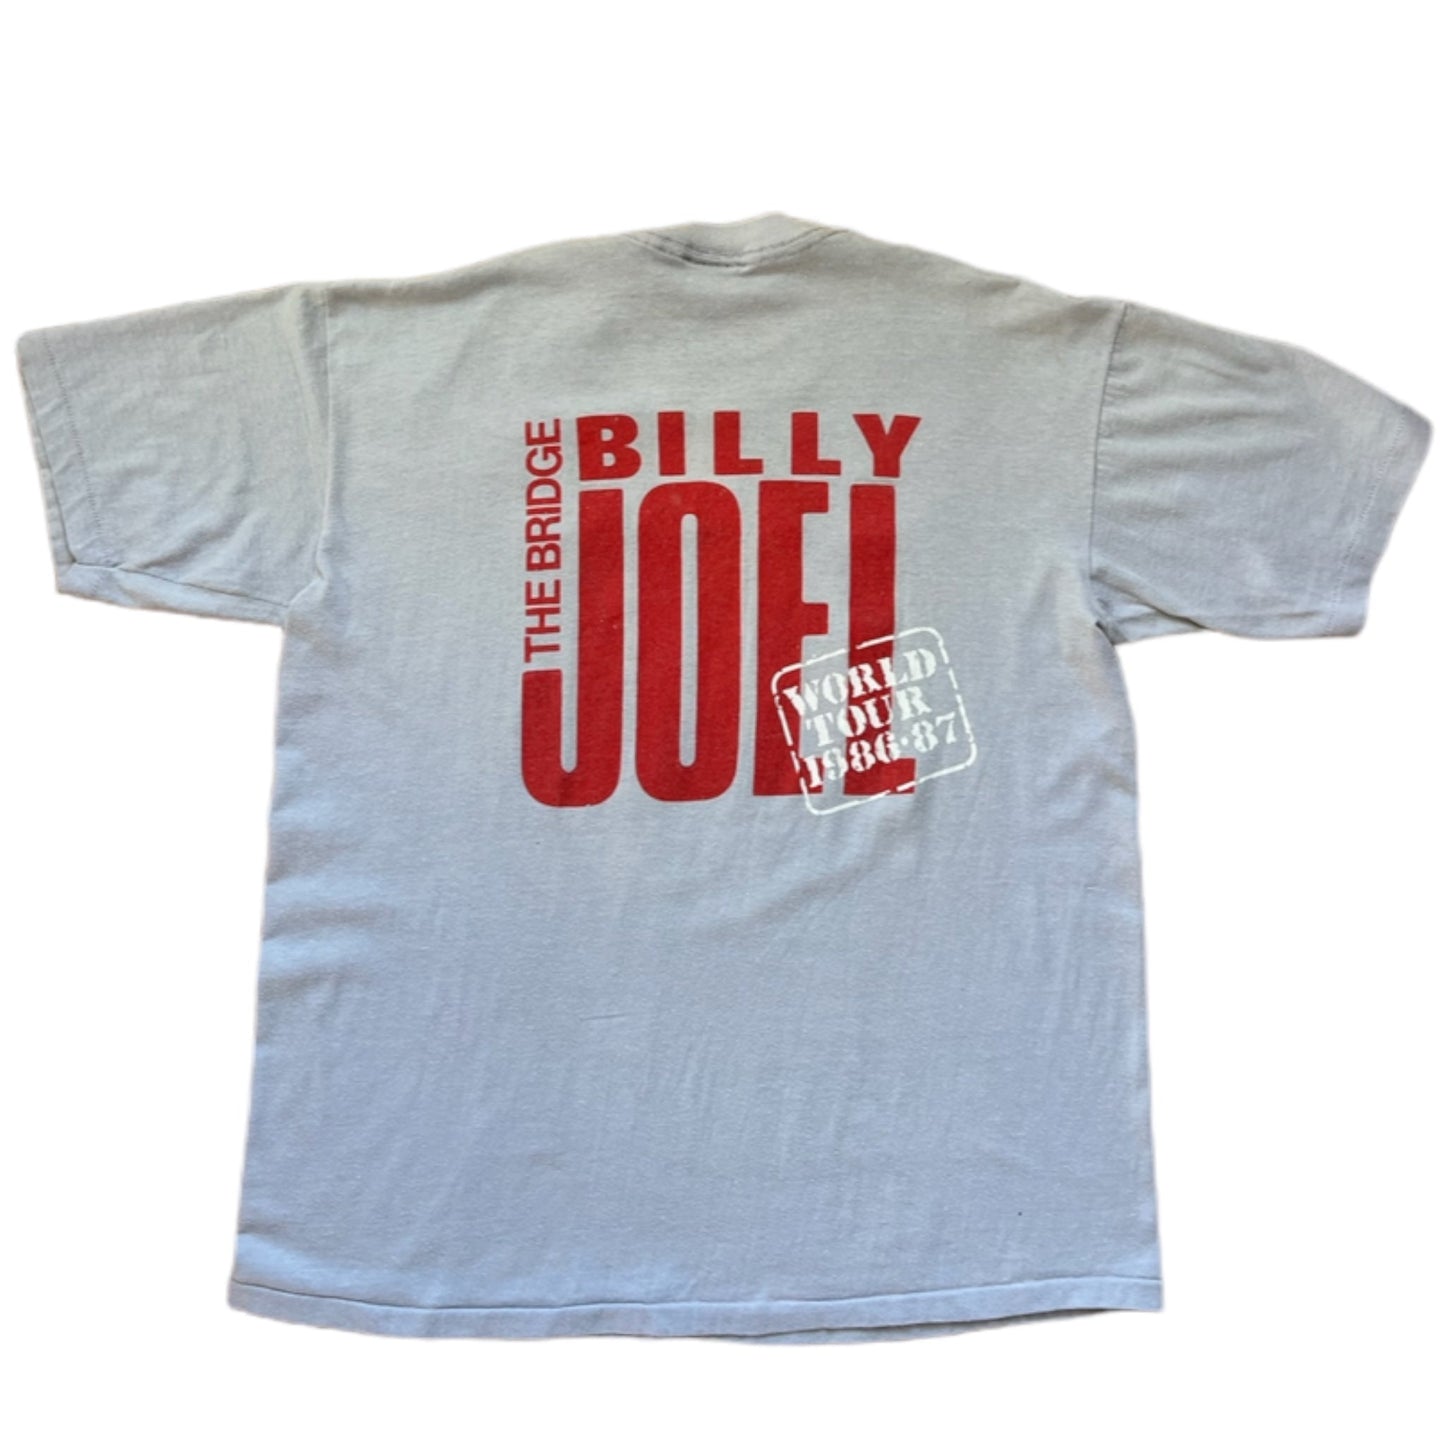 Vintage 1986 Billy Joel Tee - Something about Sofia